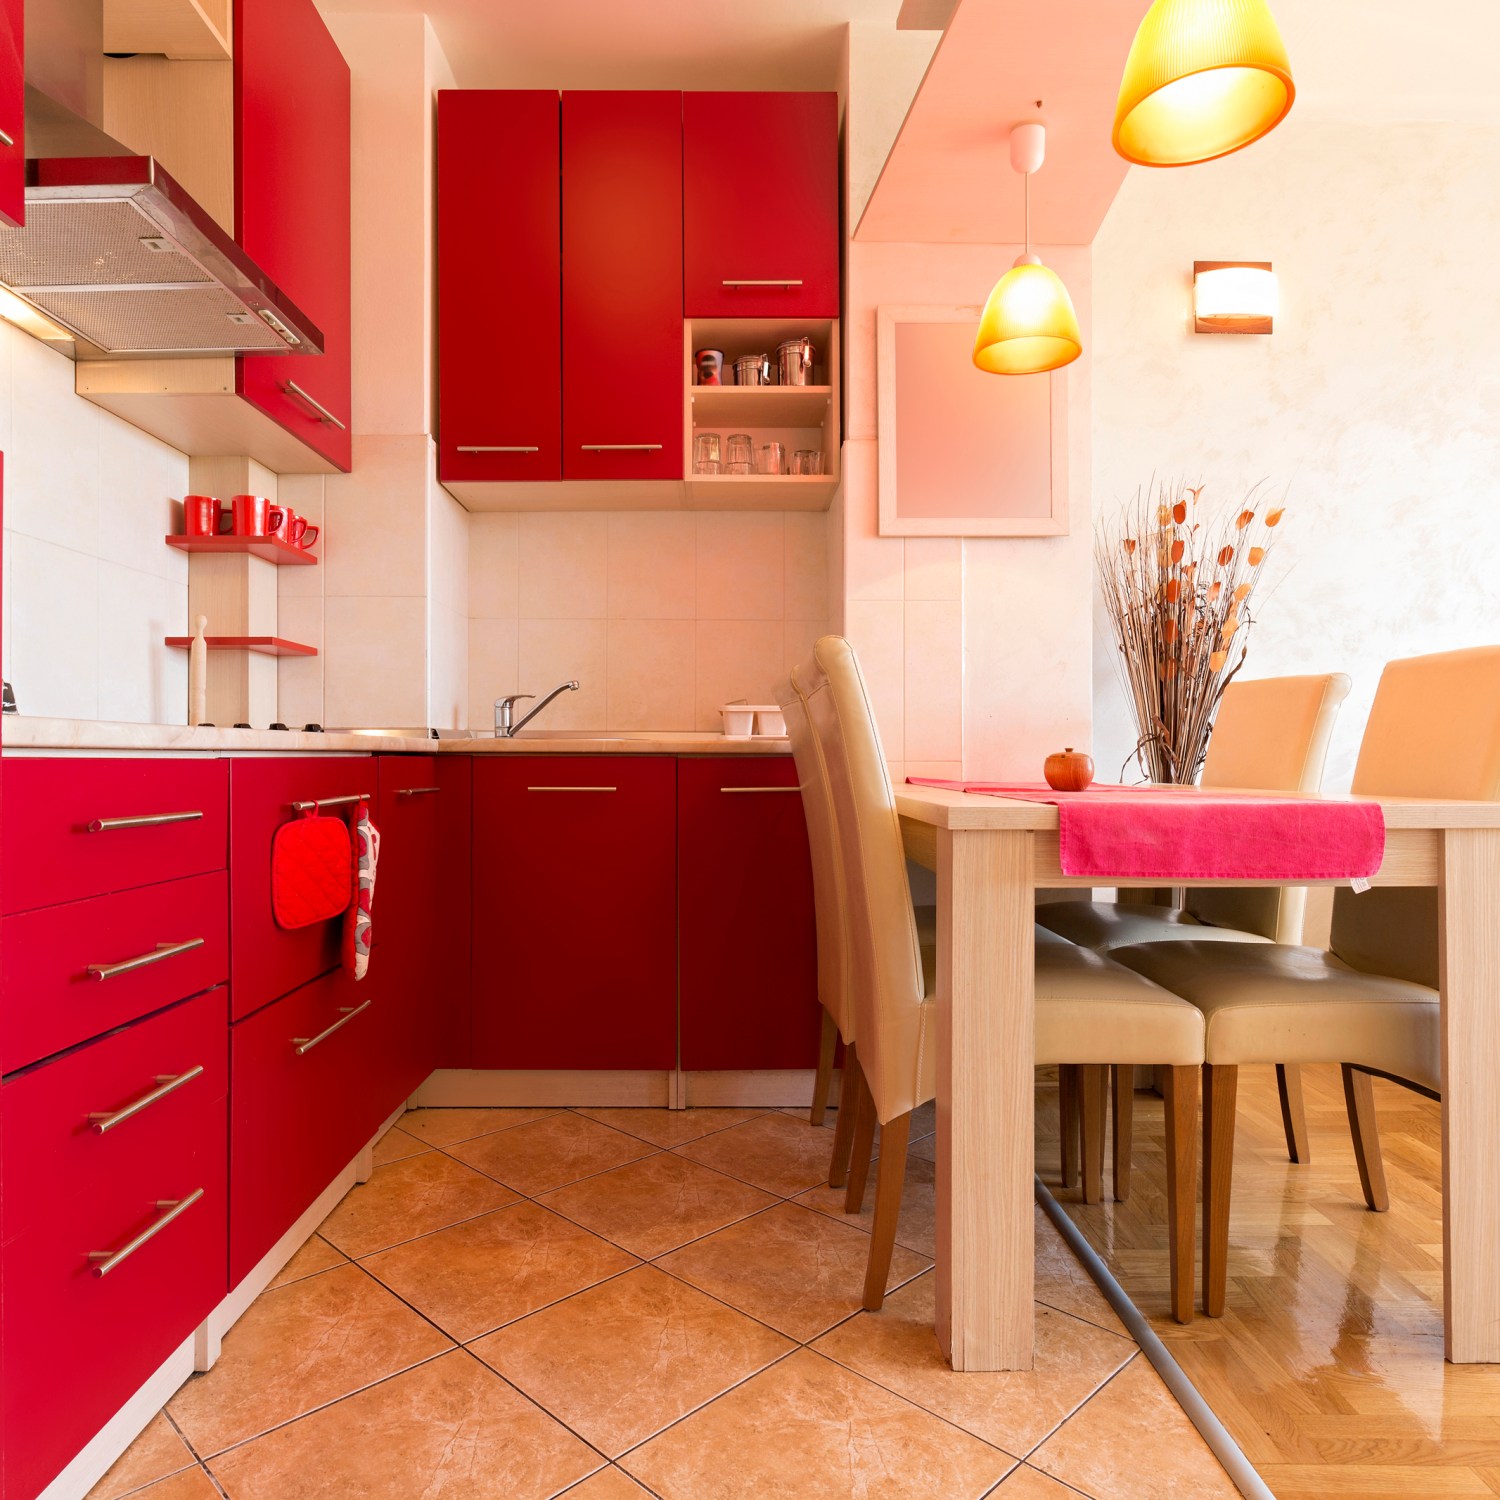 Remodeling-kitchen-personality-modern-red-tile-warm-hero